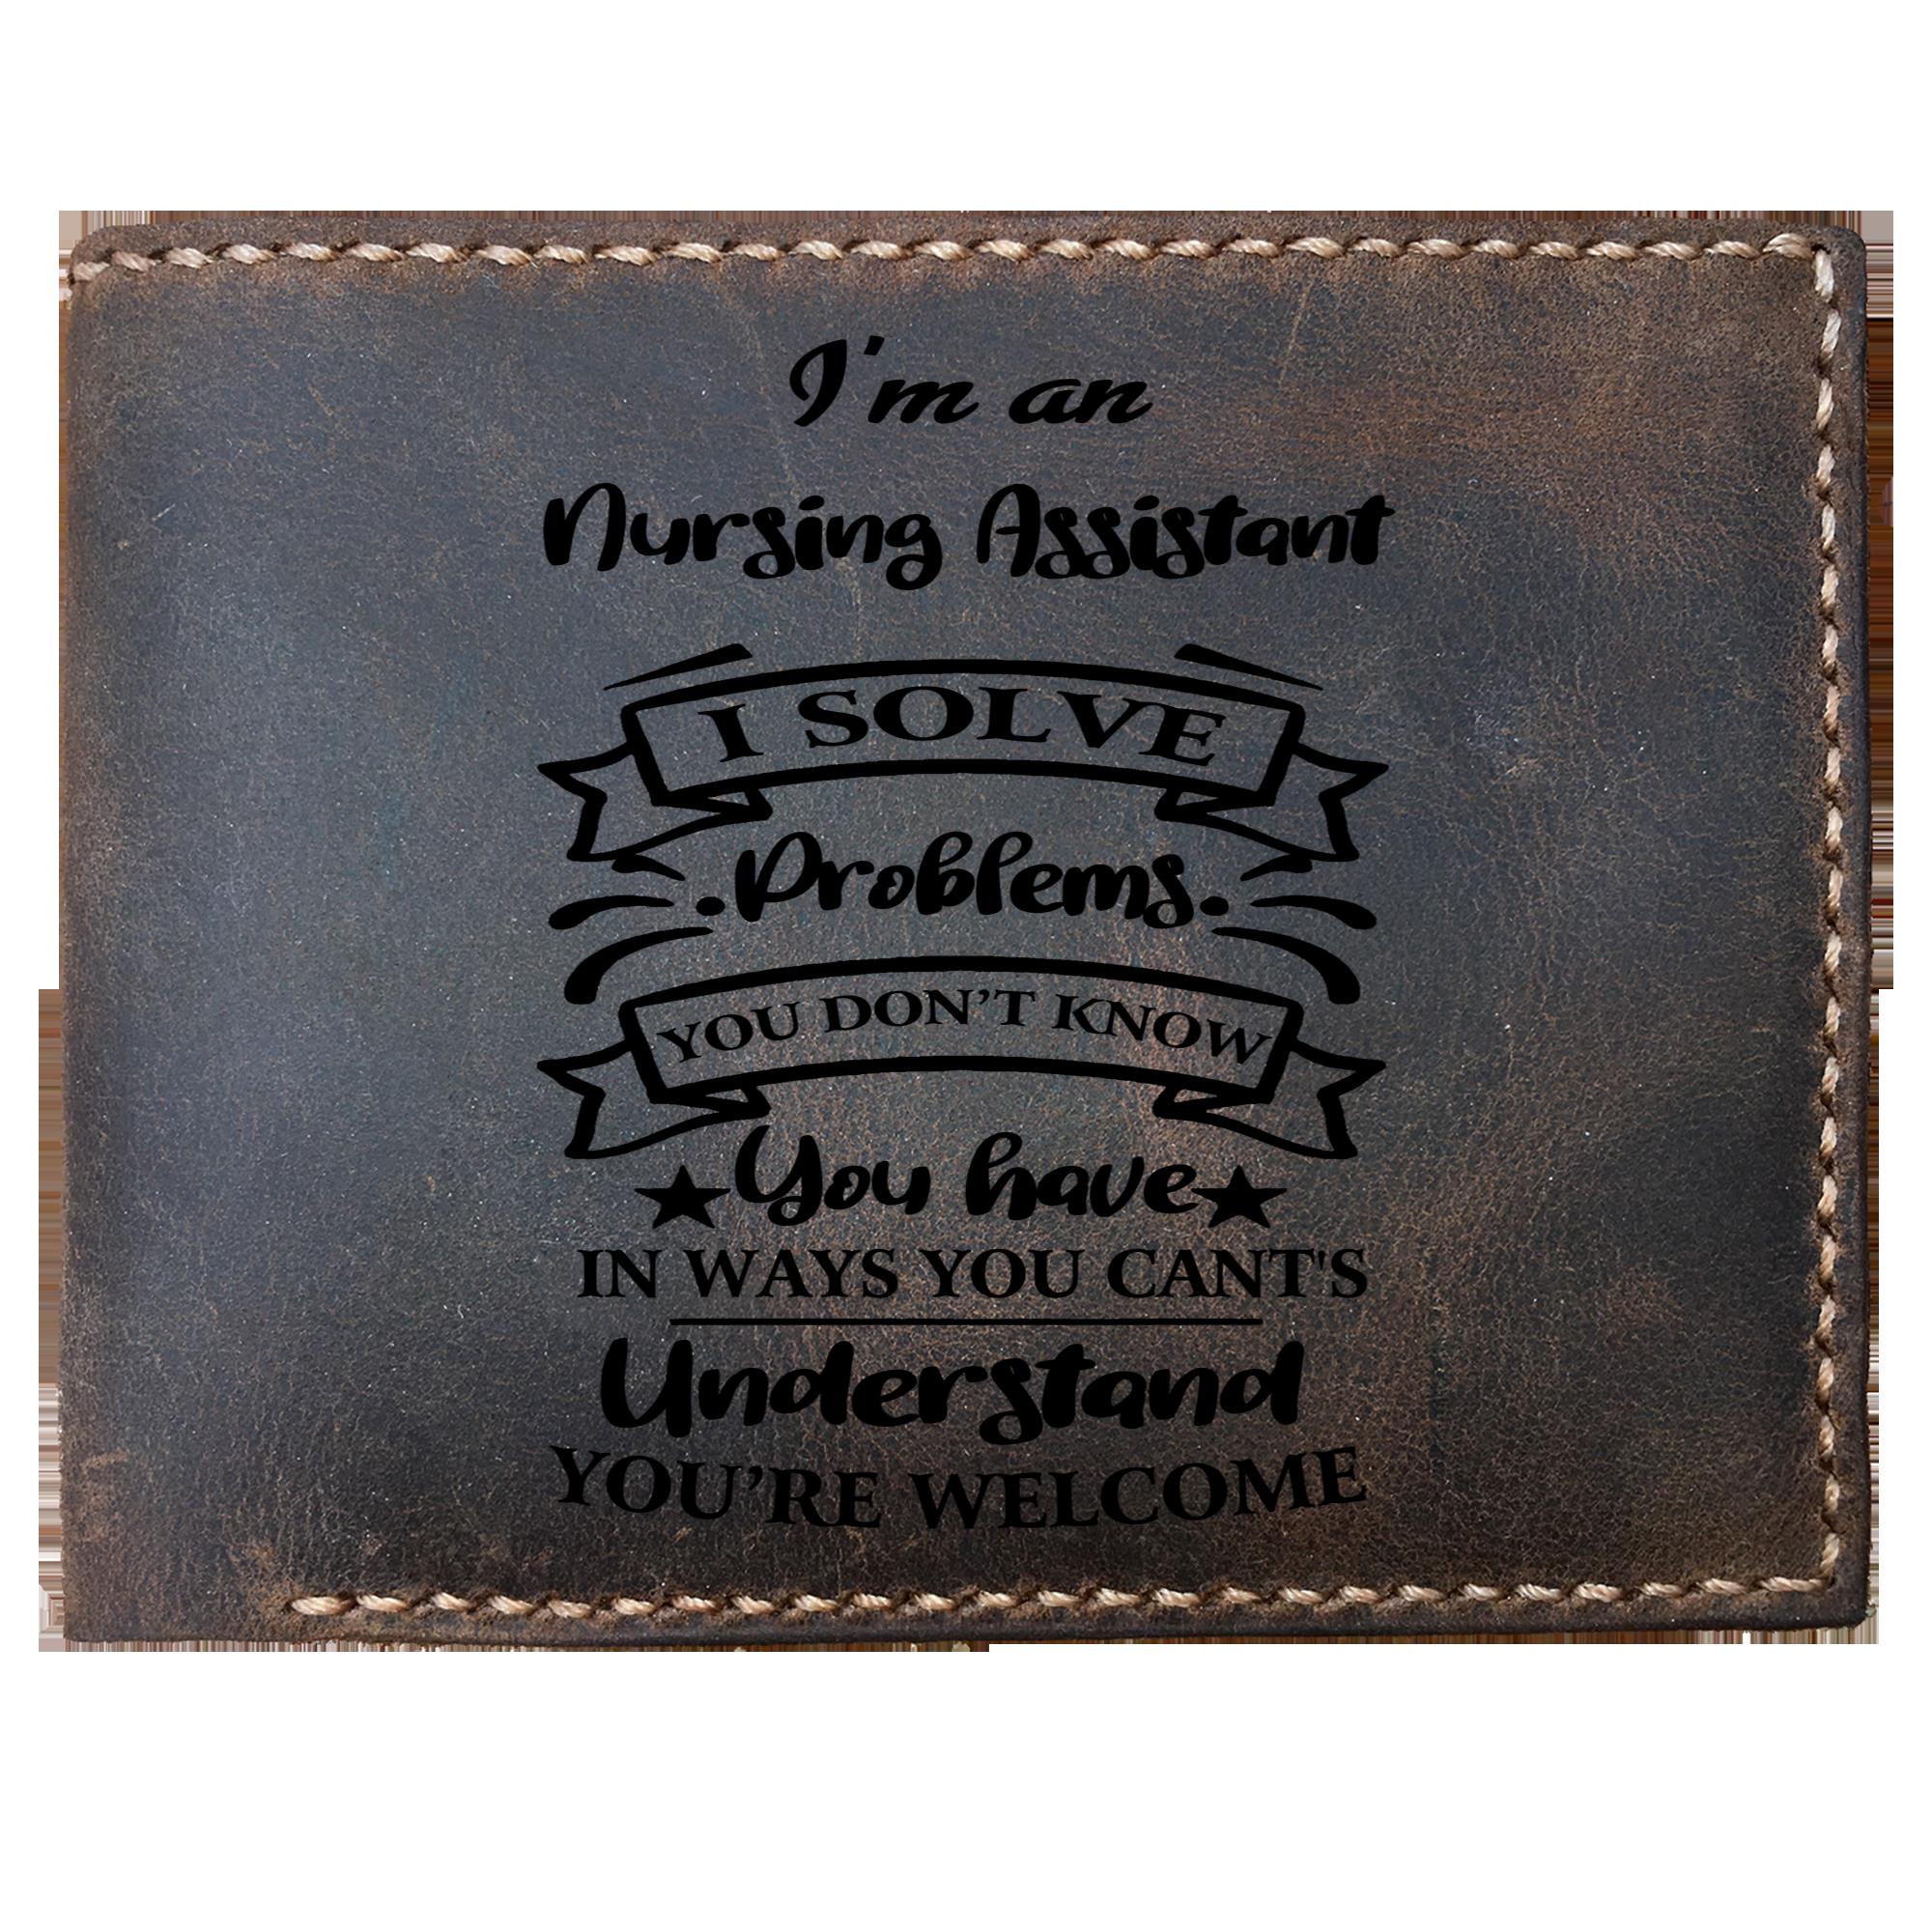 Skitongifts Funny Custom Laser Engraved Bifold Leather Wallet For Men, I'm an Nursing Assistant Solve Problems, Father's Day Gifts